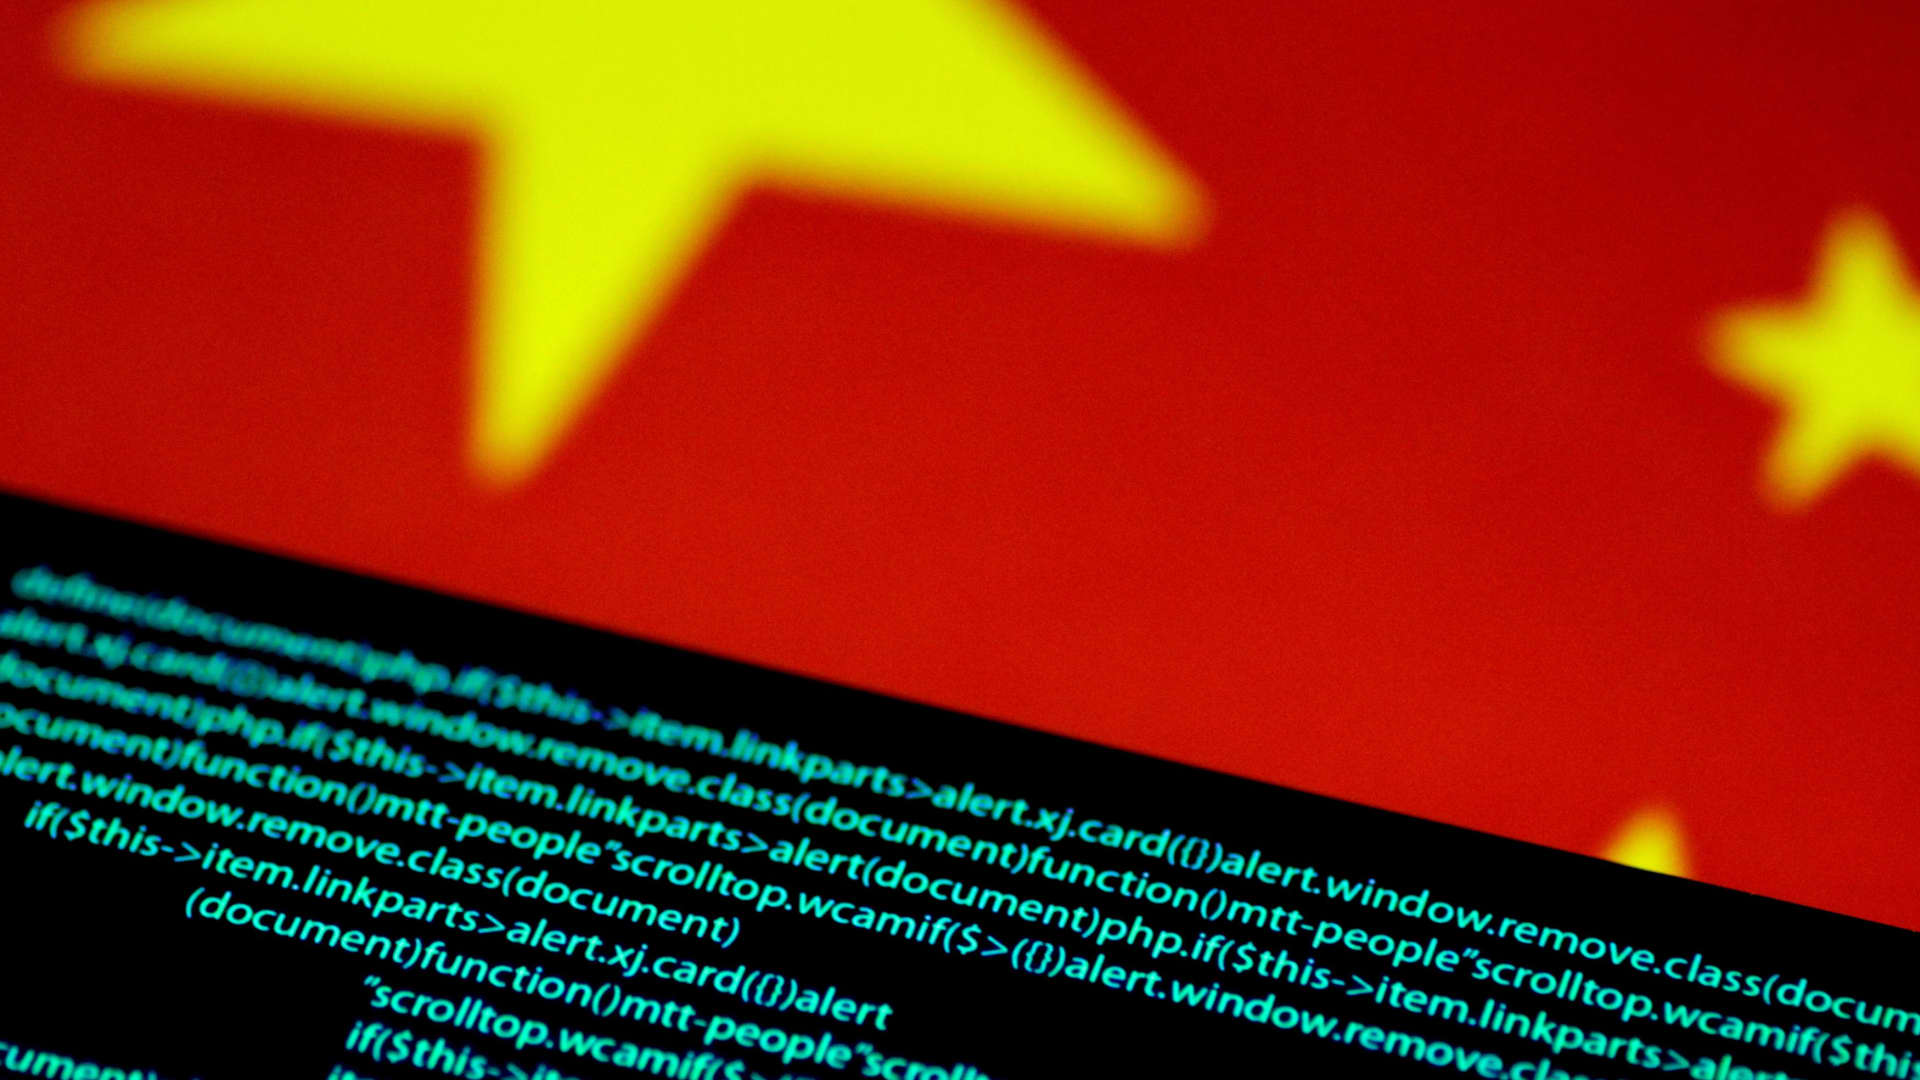 Chinese tech giants share details of their prized algorithms with top regulator in unprecedented move